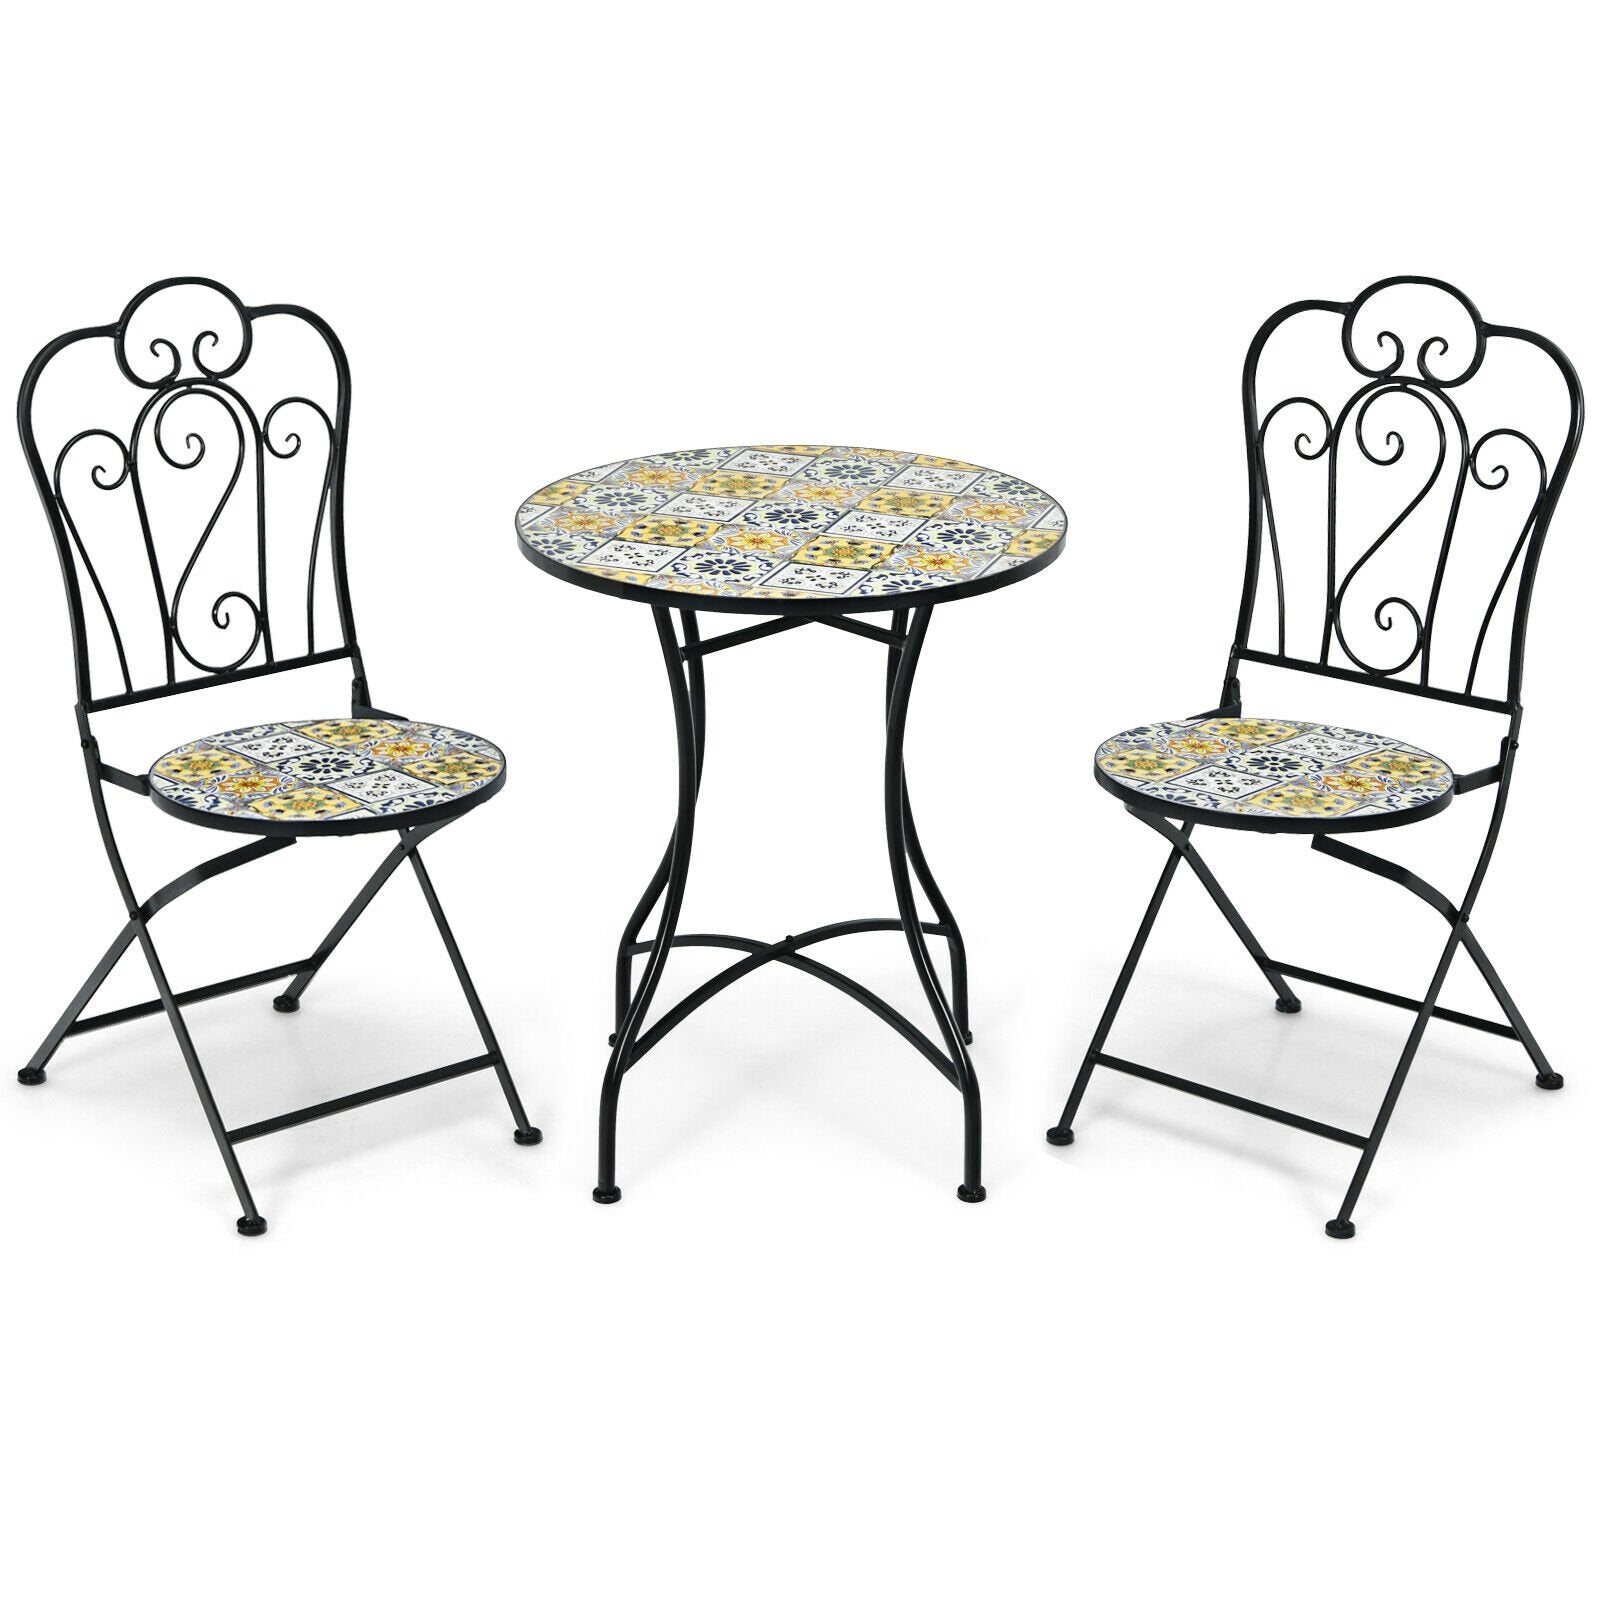 3 Pieces Patio Bistro Mosaic Design Set with Folding Chairs and Round Table, Black - Gallery Canada